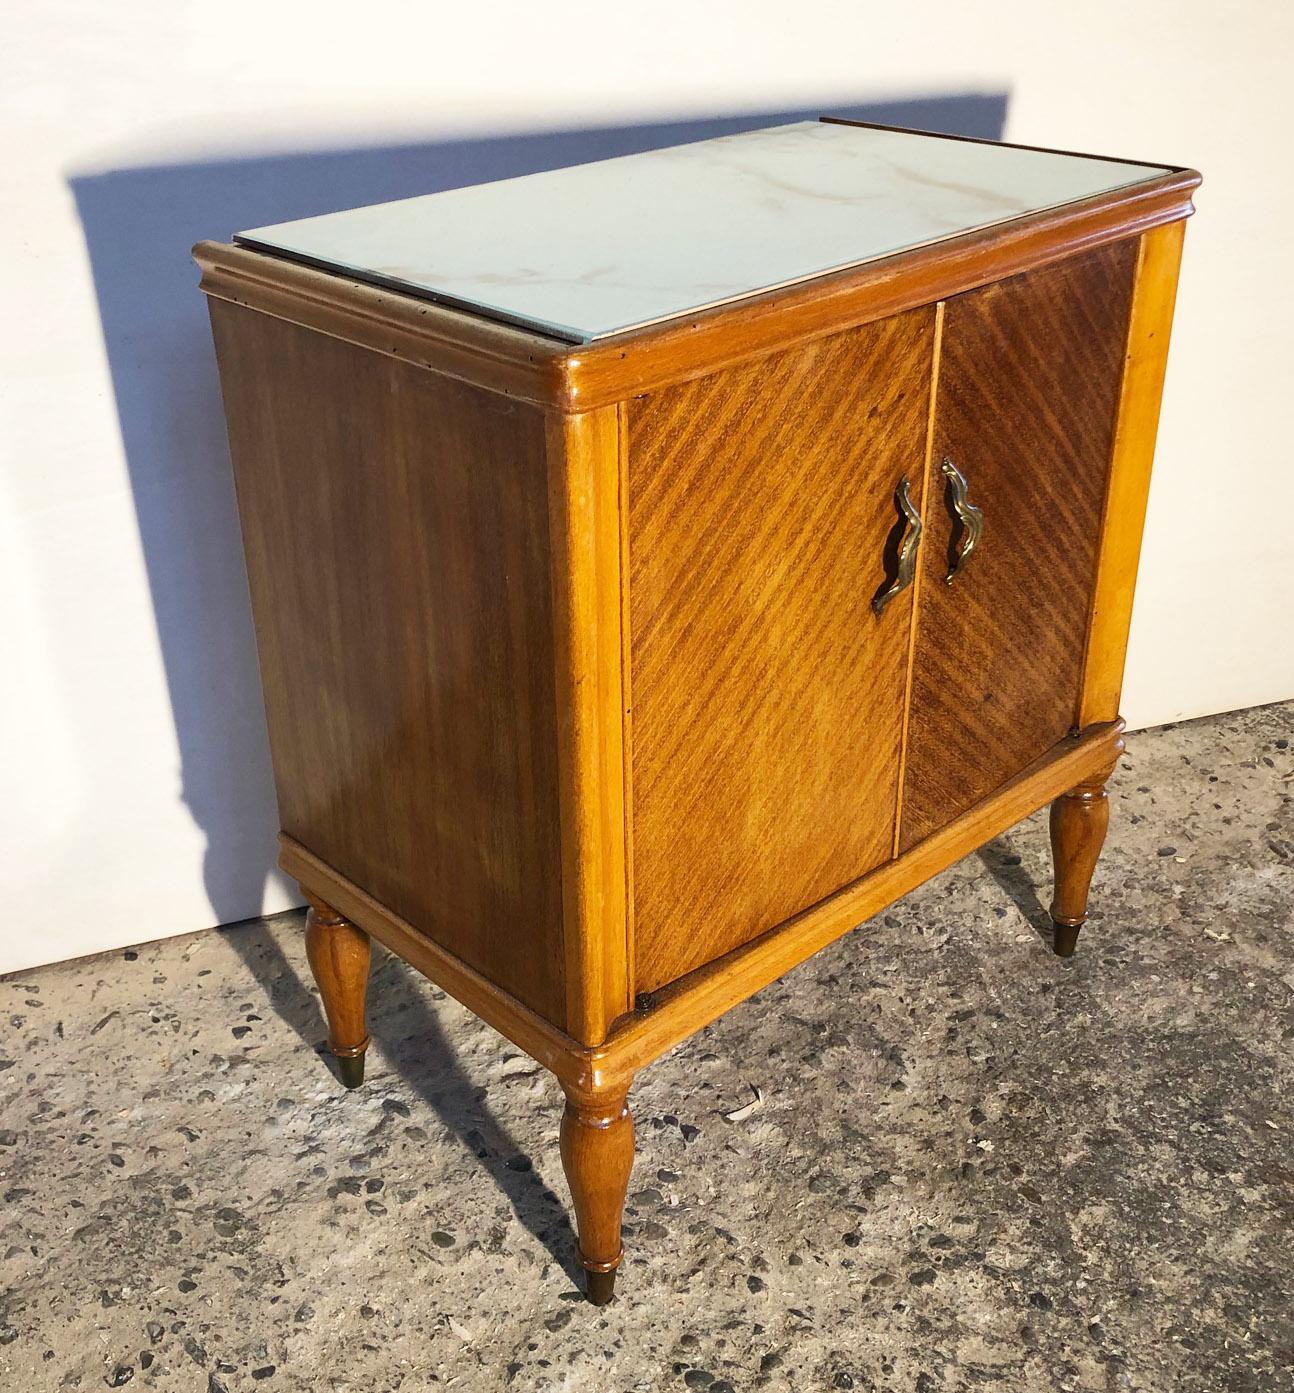 Italian night stands from 1970 in walnut natural color, glass top.
They will be delivered in a specific wooden case for export, packed in bubble wrap.
Comes from an old country house in the Pisa area of Tuscany.
The paint is original in patina,